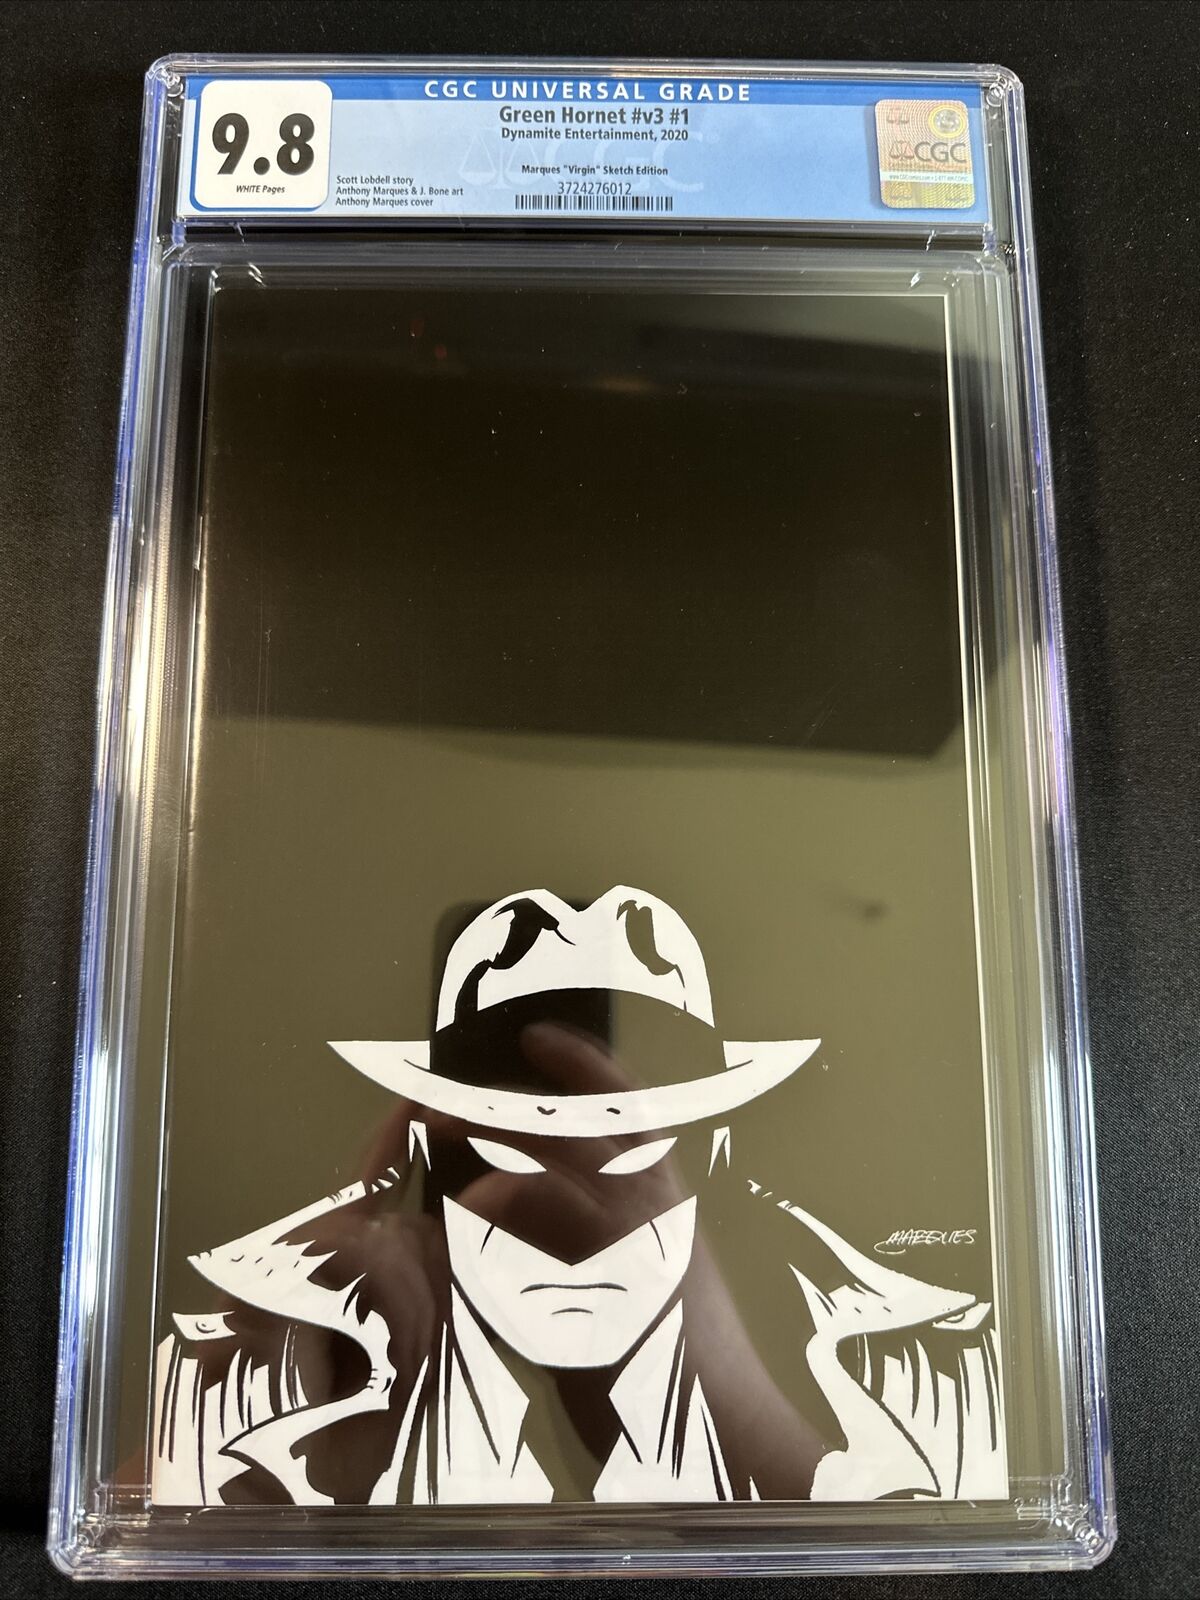 Green Hornet #1 CGC 9.8 Volume 3 Marques Virgin Sketch * Only 9.8 Blue Label *